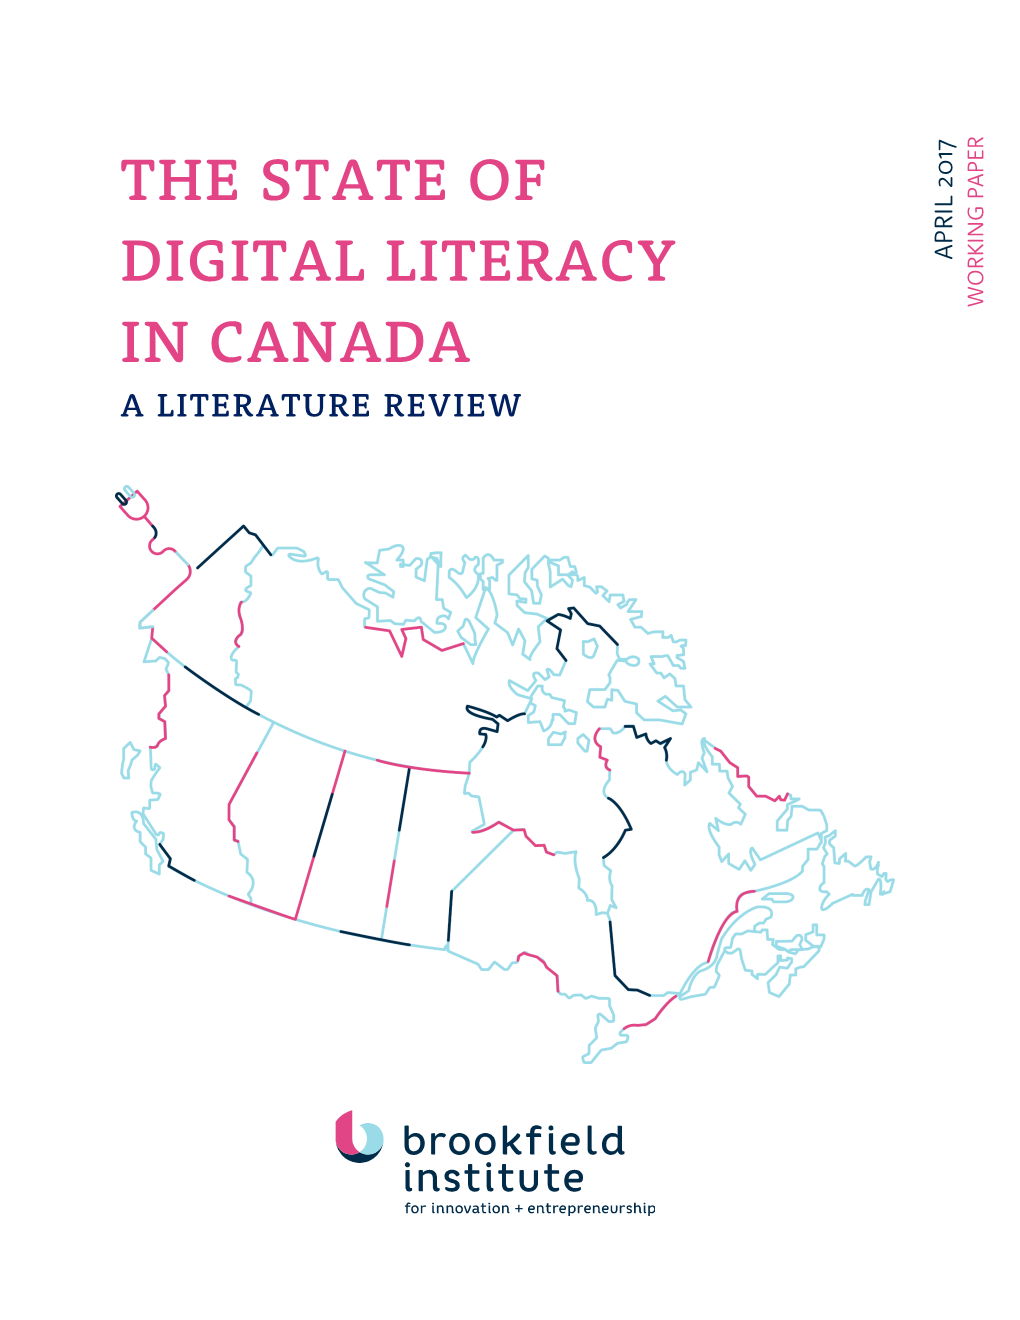 The State of Digital Literacy in Canada, Beyond the Public School System; This Would Include Mapping All Existing Public and Private Programs